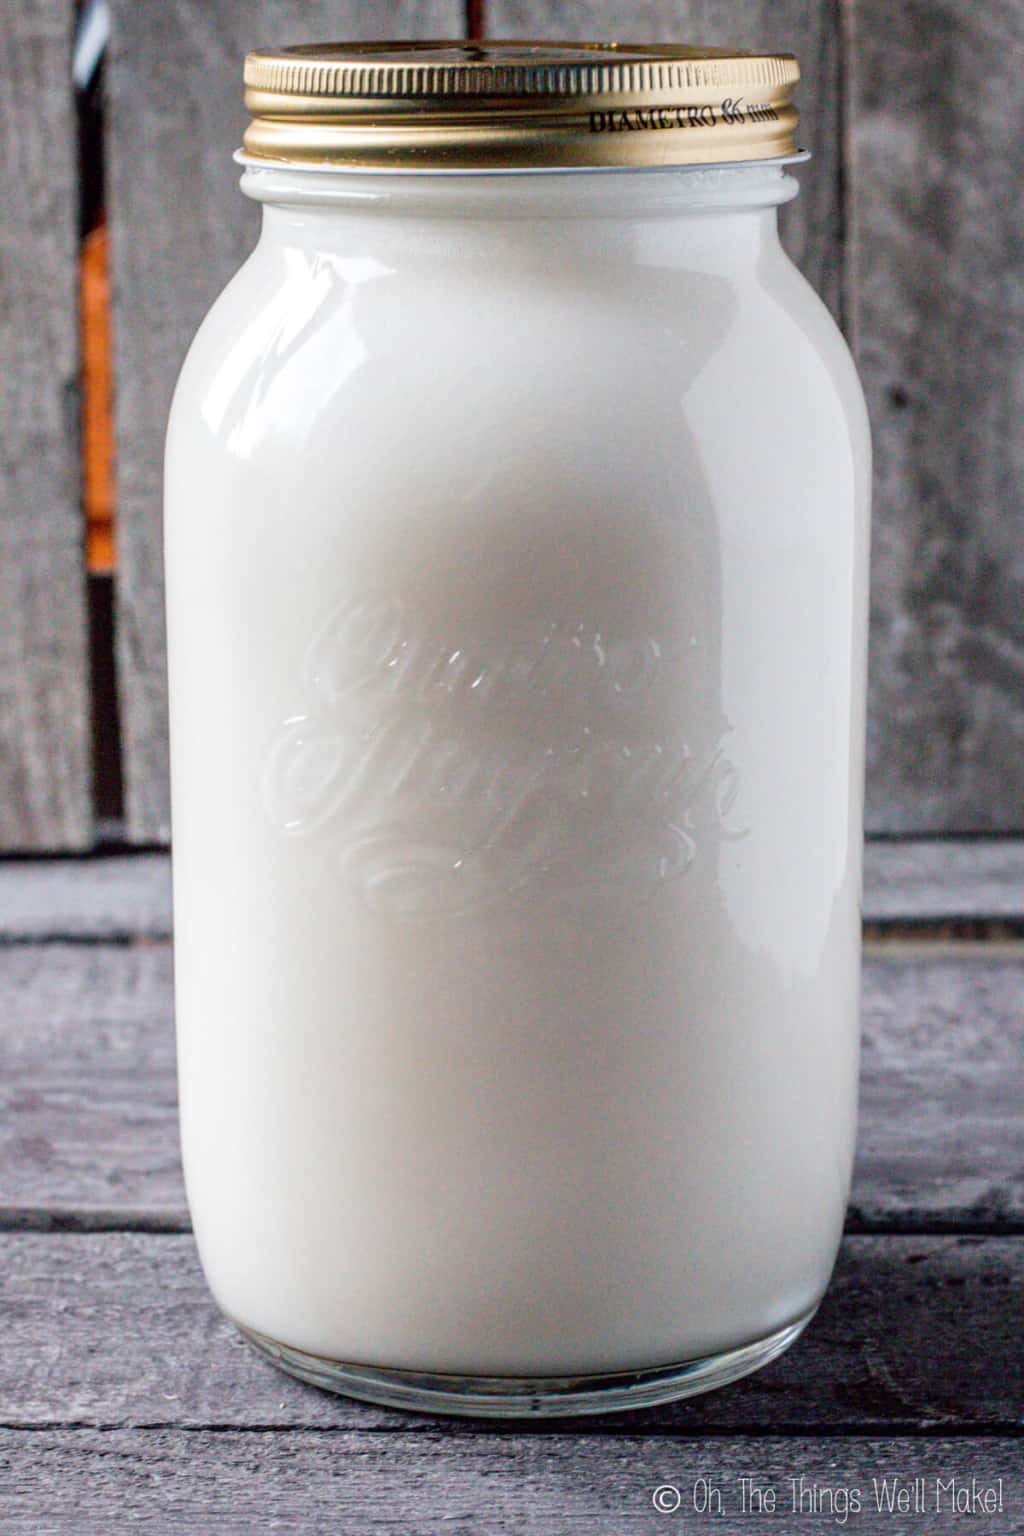 A jar of coconut oil based liquid soap that looks opaque white